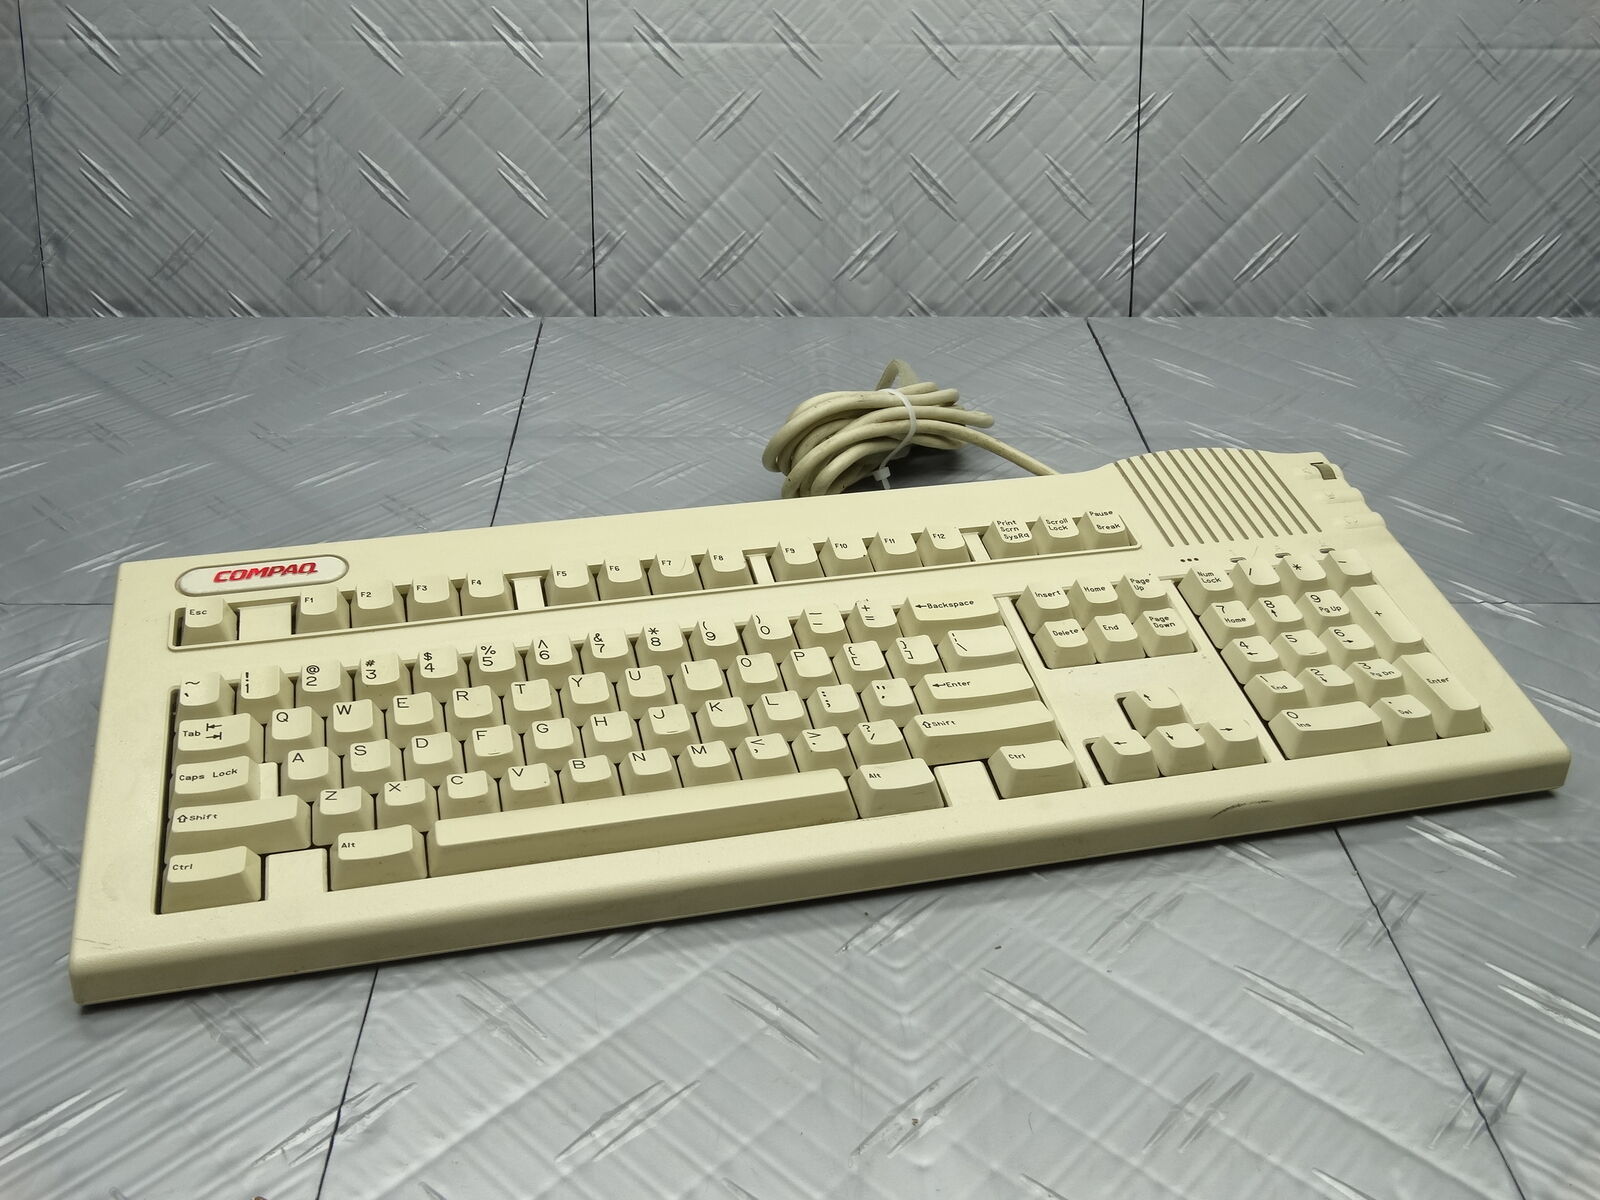 Compaq Vocalyst Mechanical Keyboard Unique Cable Mainframe Collection Rare